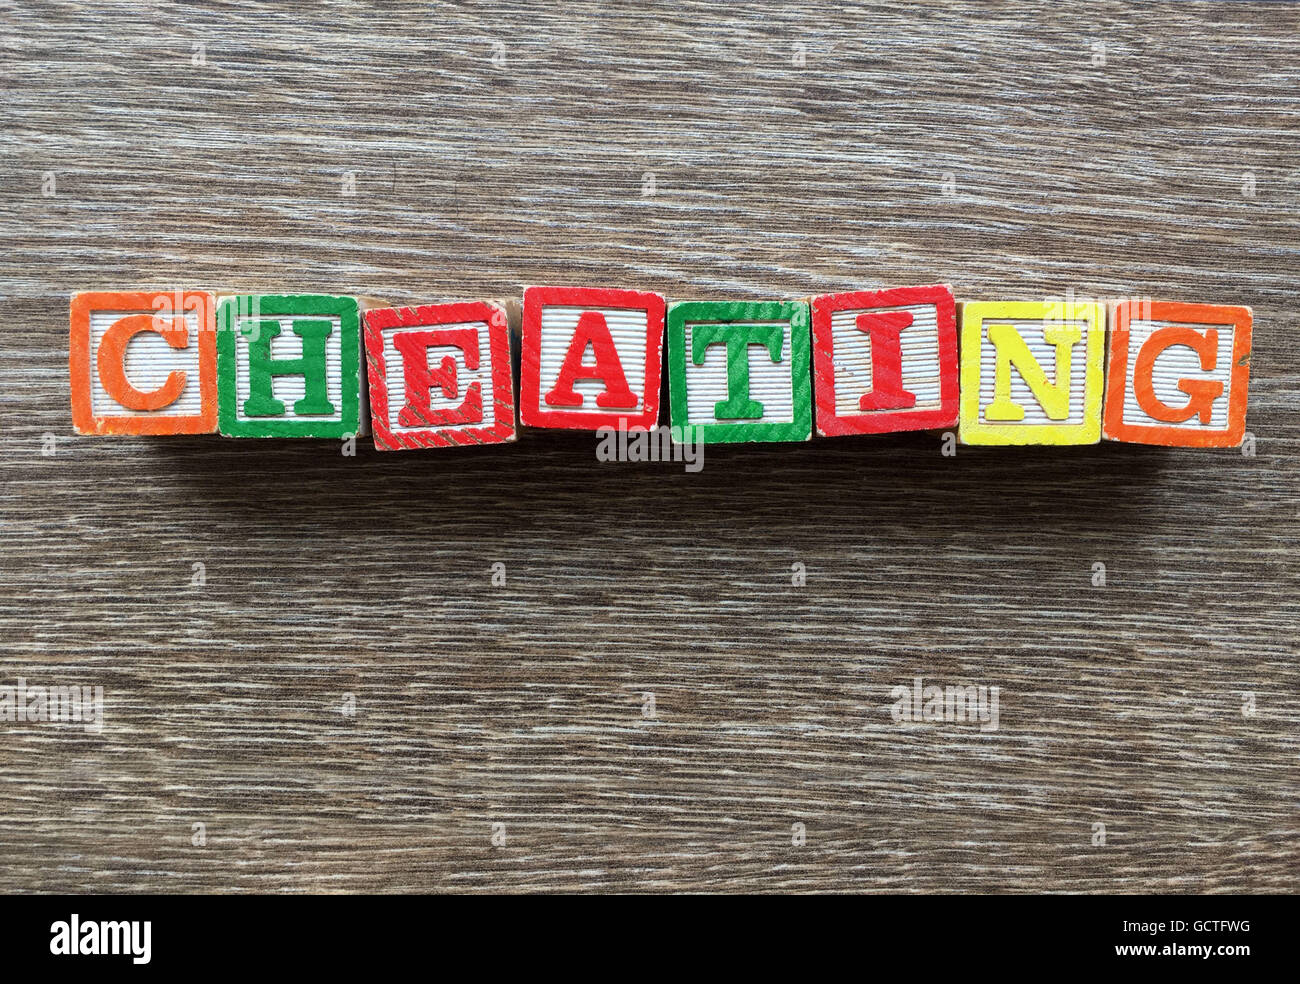 CHEATING word written with wood block letter toys Stock Photo